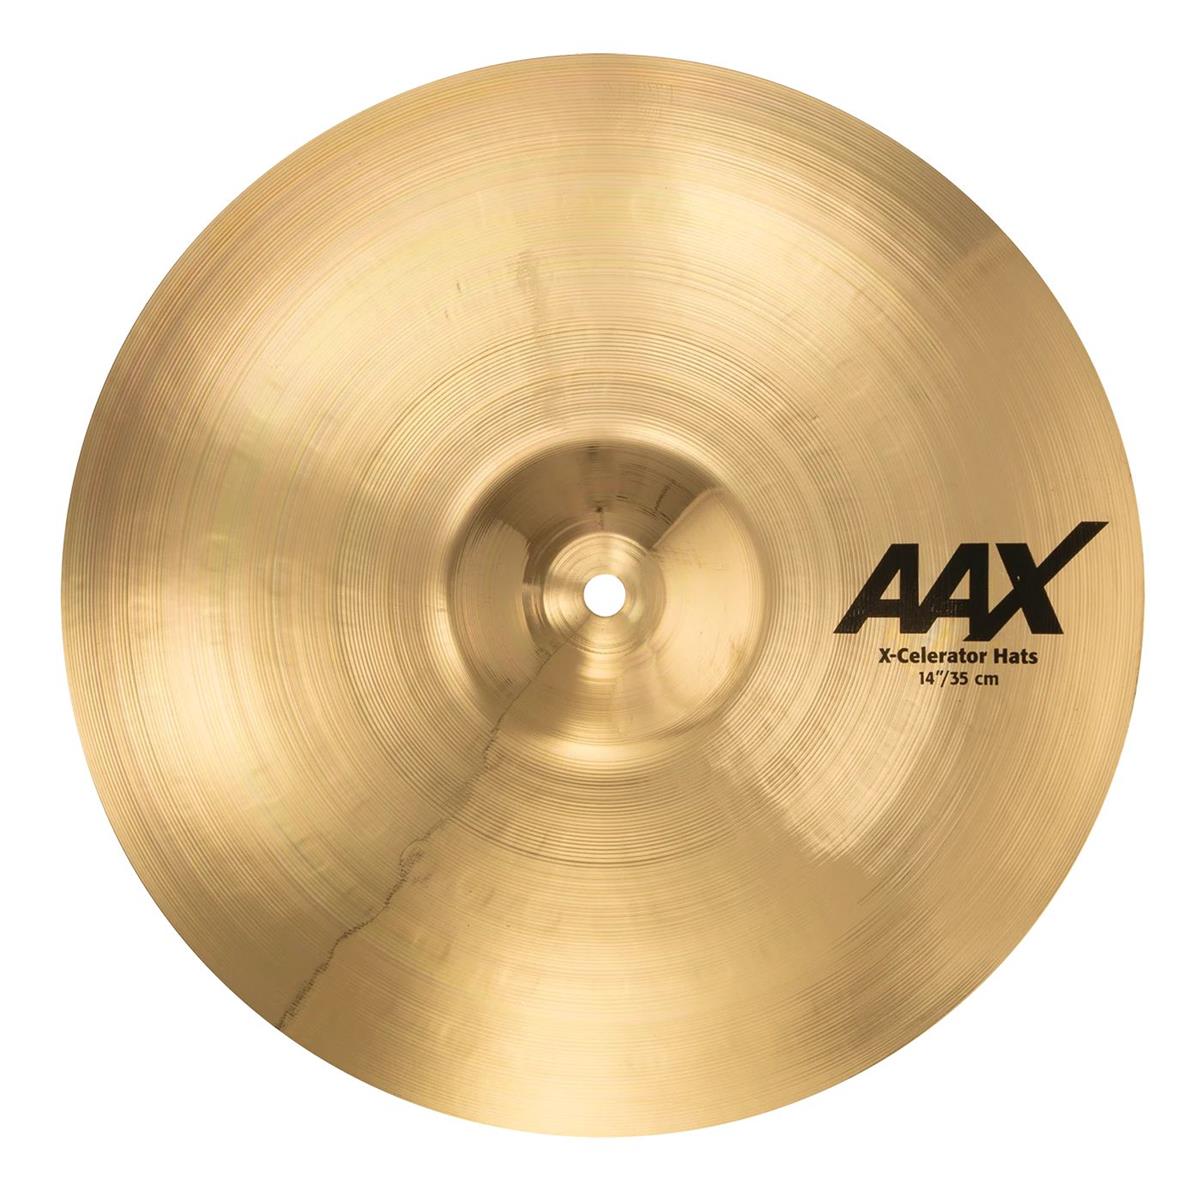 Sabian 14" AAX X-Celerator Hat Top Cymbal, Medium-Heavy, Brilliant Finish With a rippled Air Wave bottom eliminating airlock and delivering super crisp and cutting stick sounds, SABIAN 14" AAX X-Celerator Hi-Hats cut through with exceptional clarity at all volumes. The SABIAN AAX series delivers consistently bright, crisp, clear and cutting responses - AAX is the ultimate Modern Bright sound!